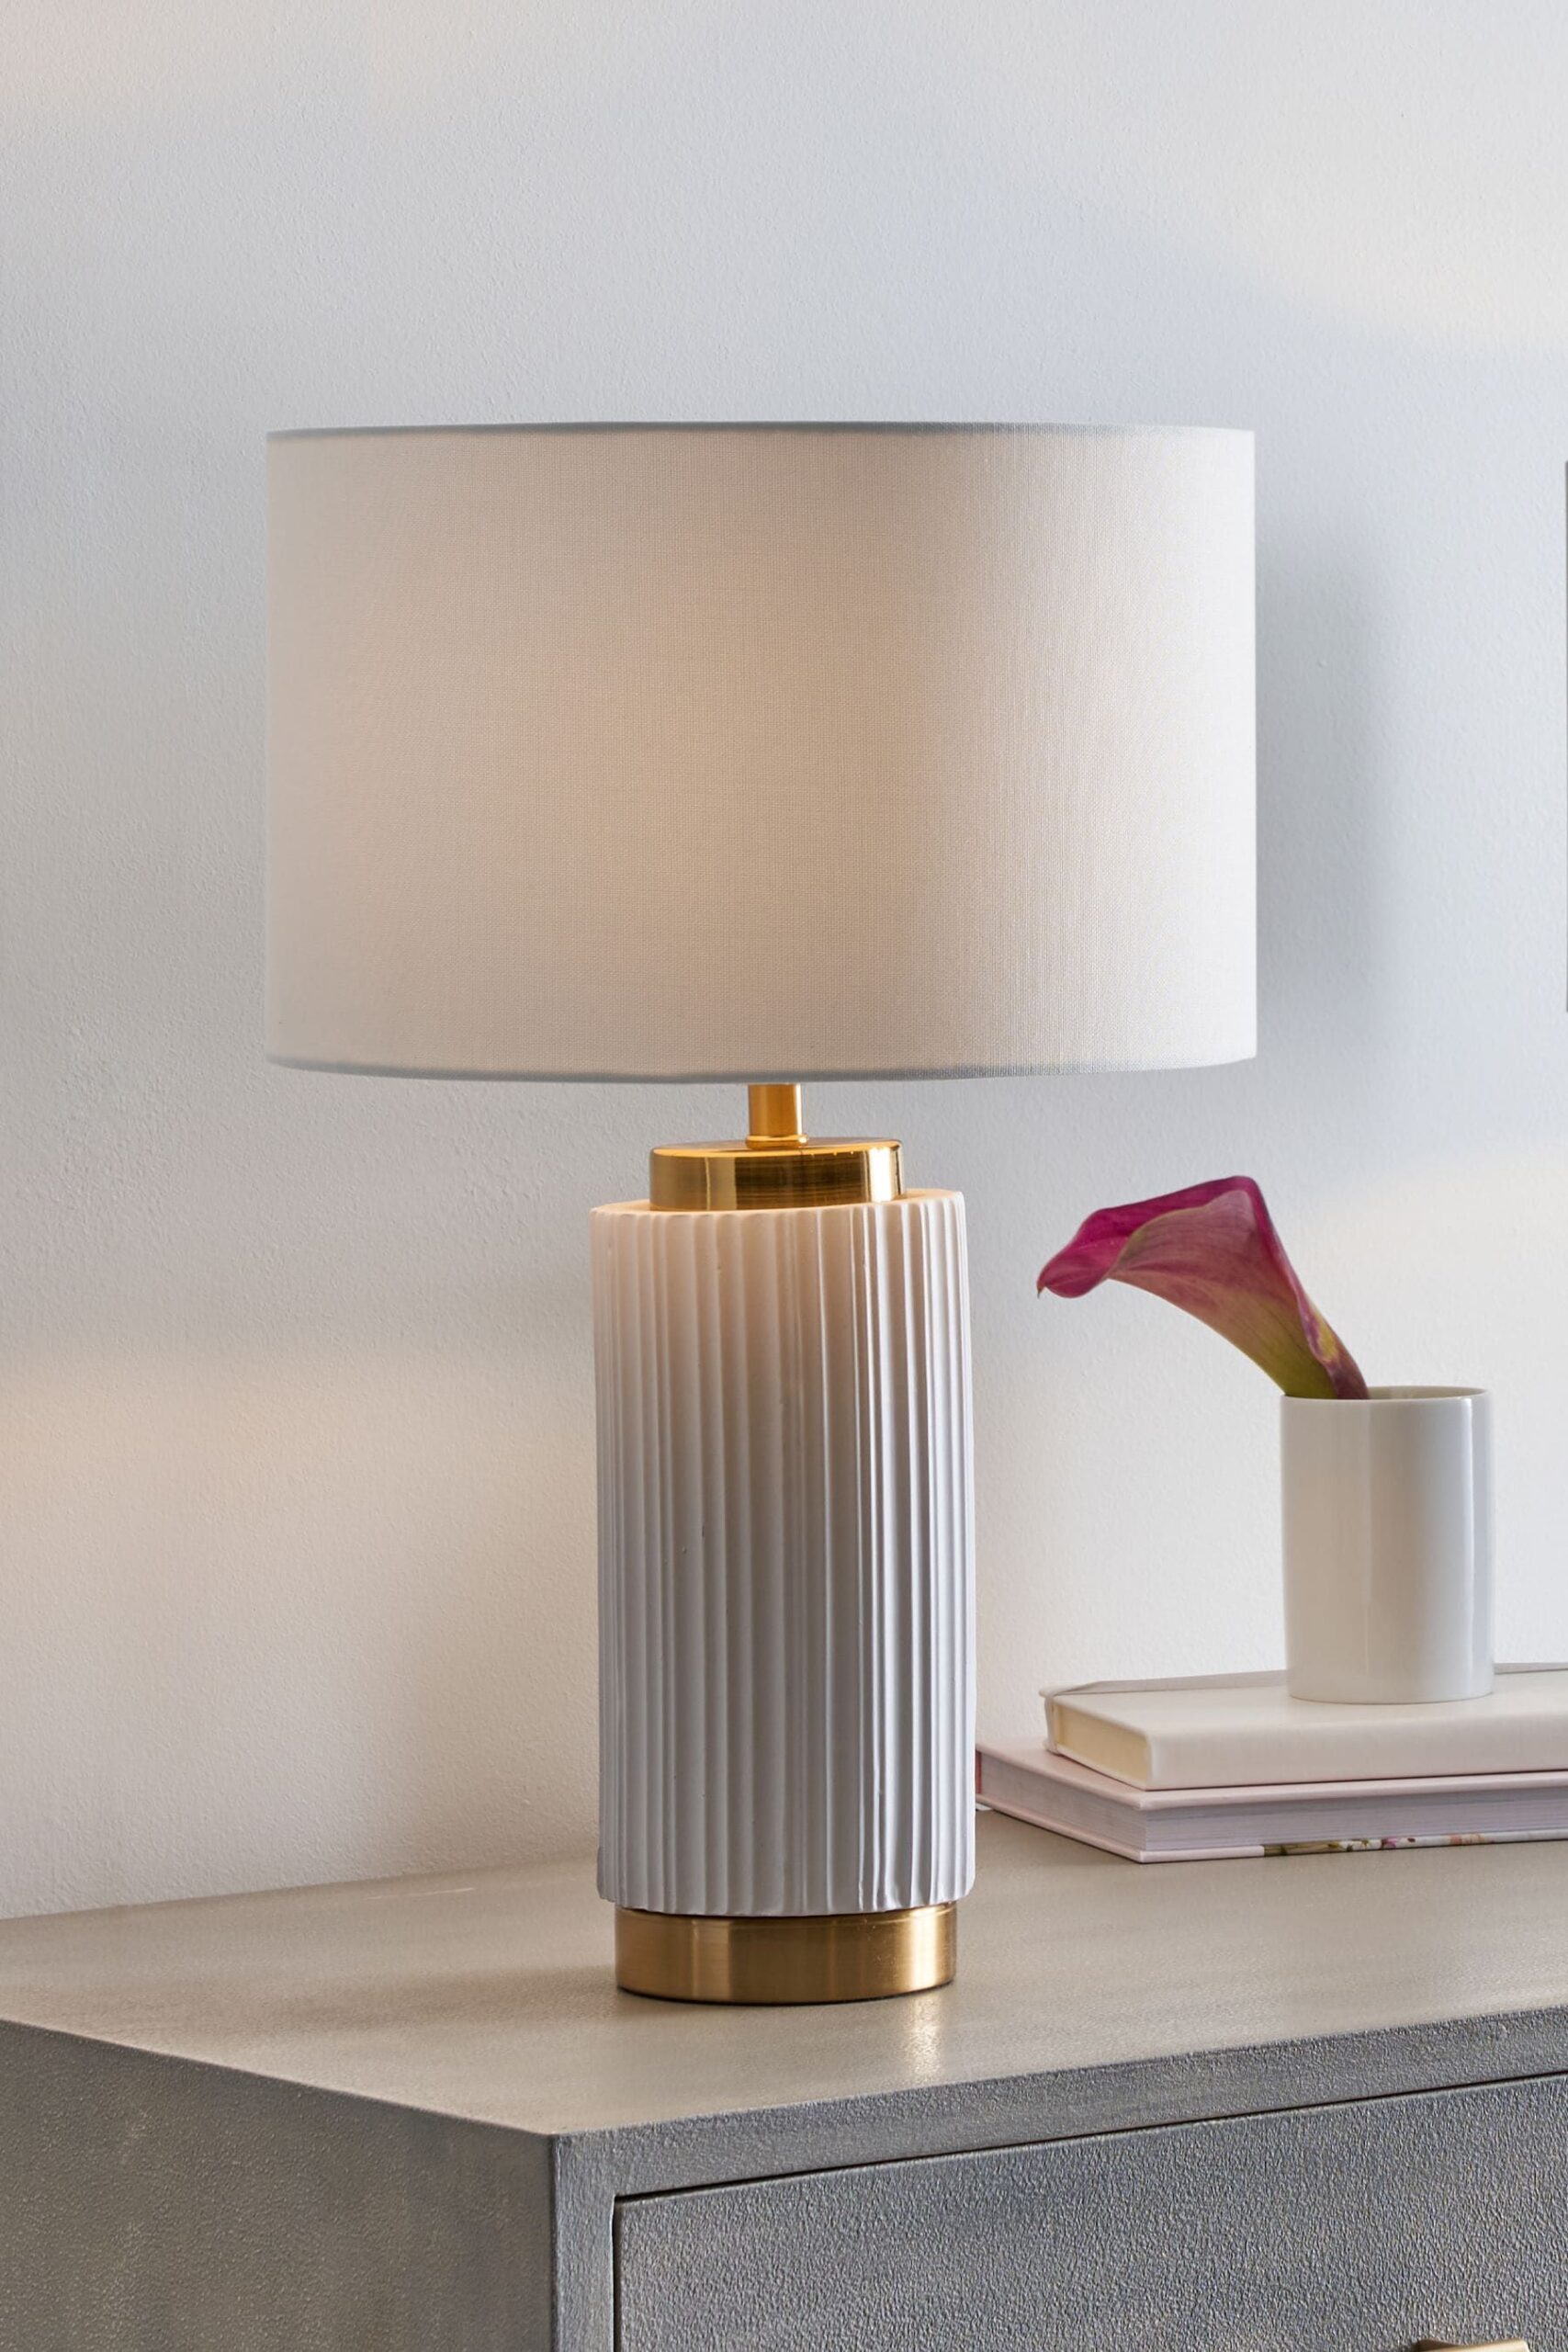 White Bedside Lamp : Elegant White Bedside Lamp Adds Style to Any Bedroom